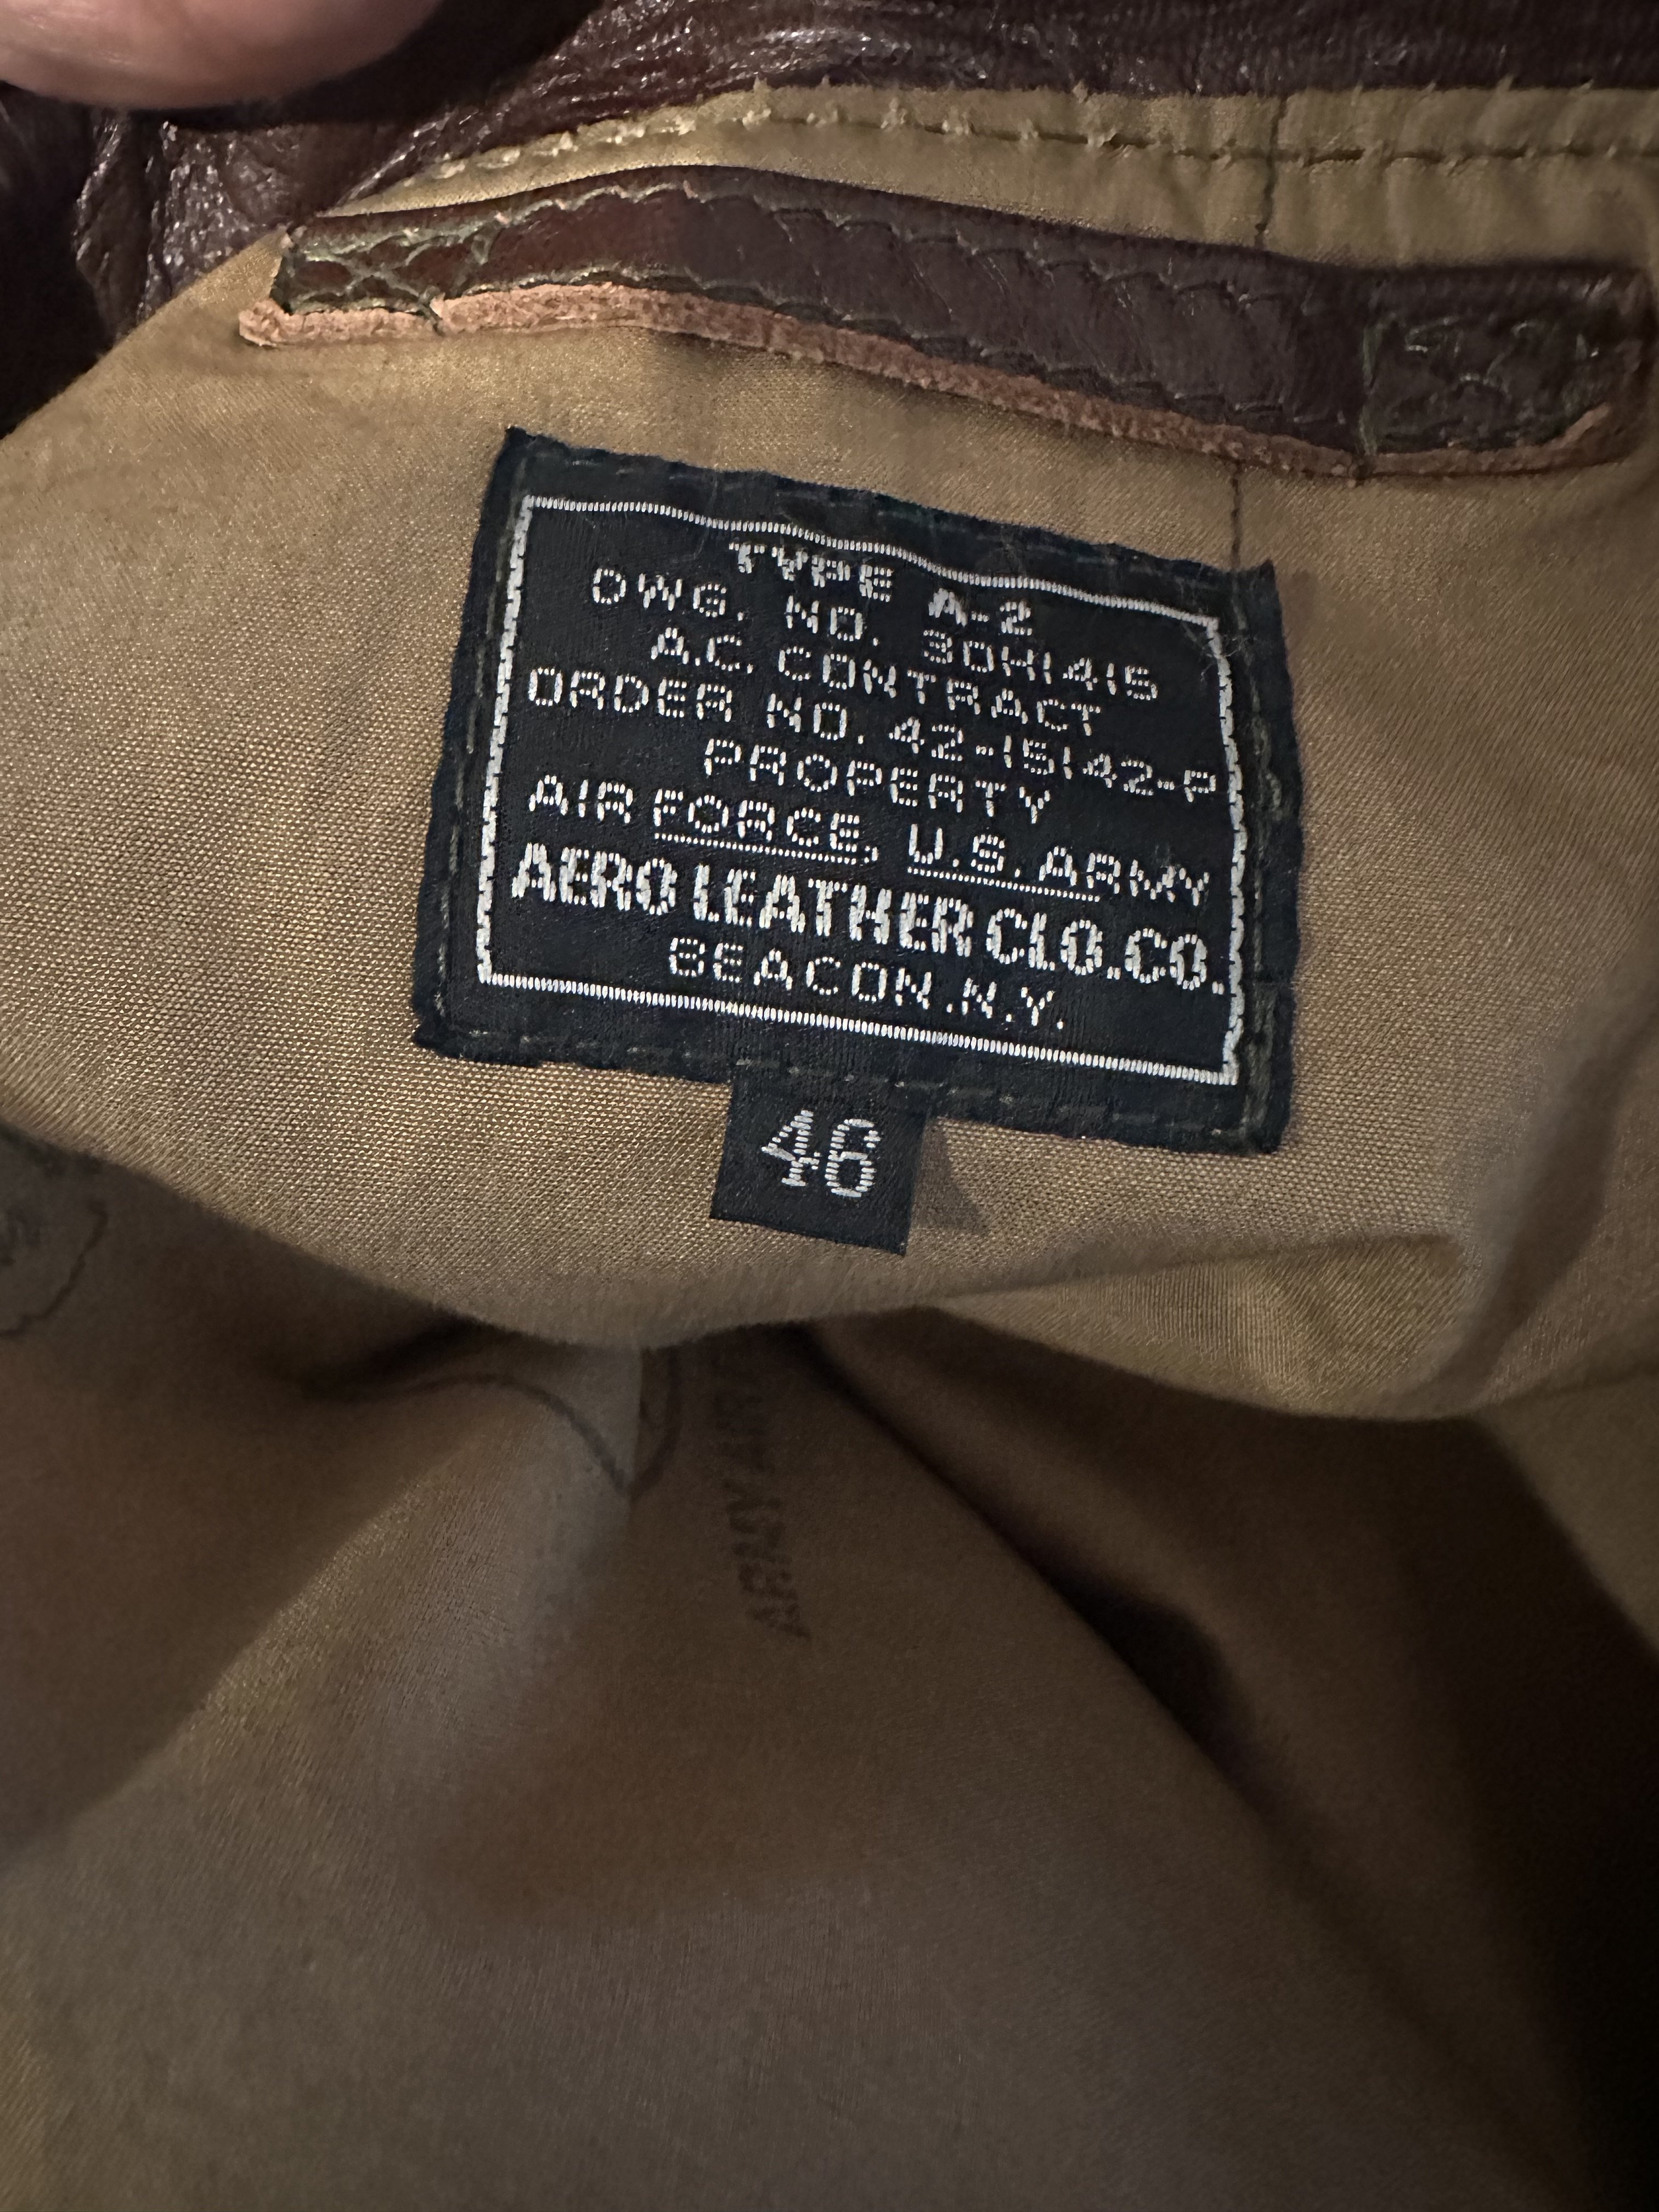 Showing Aero Some love | Page 2 | Vintage Leather Jackets Forum